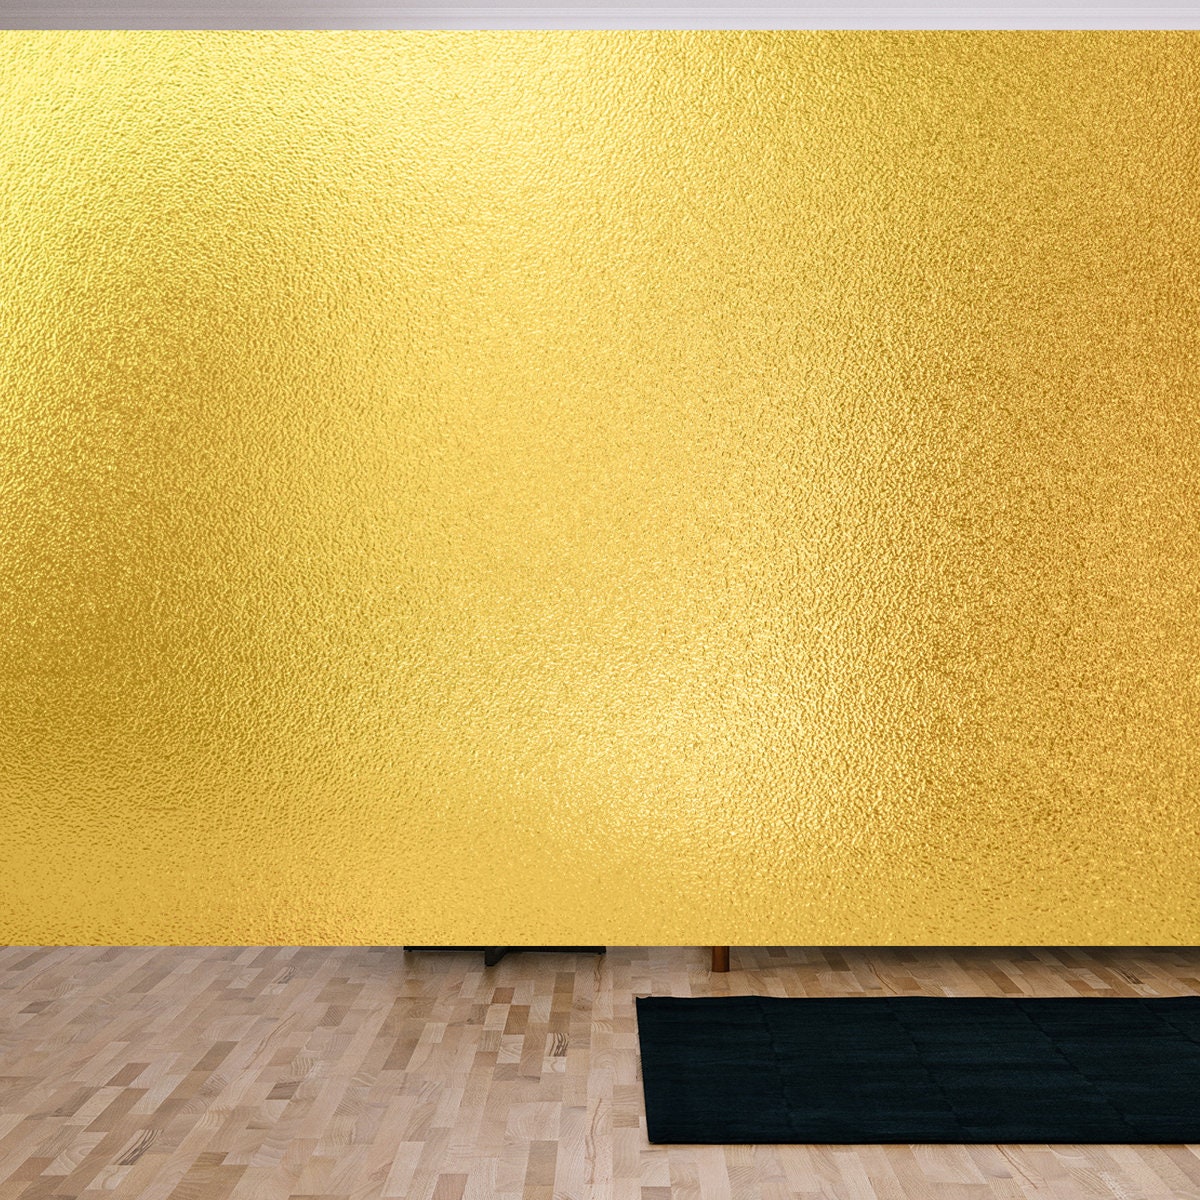 Gold Background. Luxury Shiny Gold Texture Wallpaper Living Room Mural